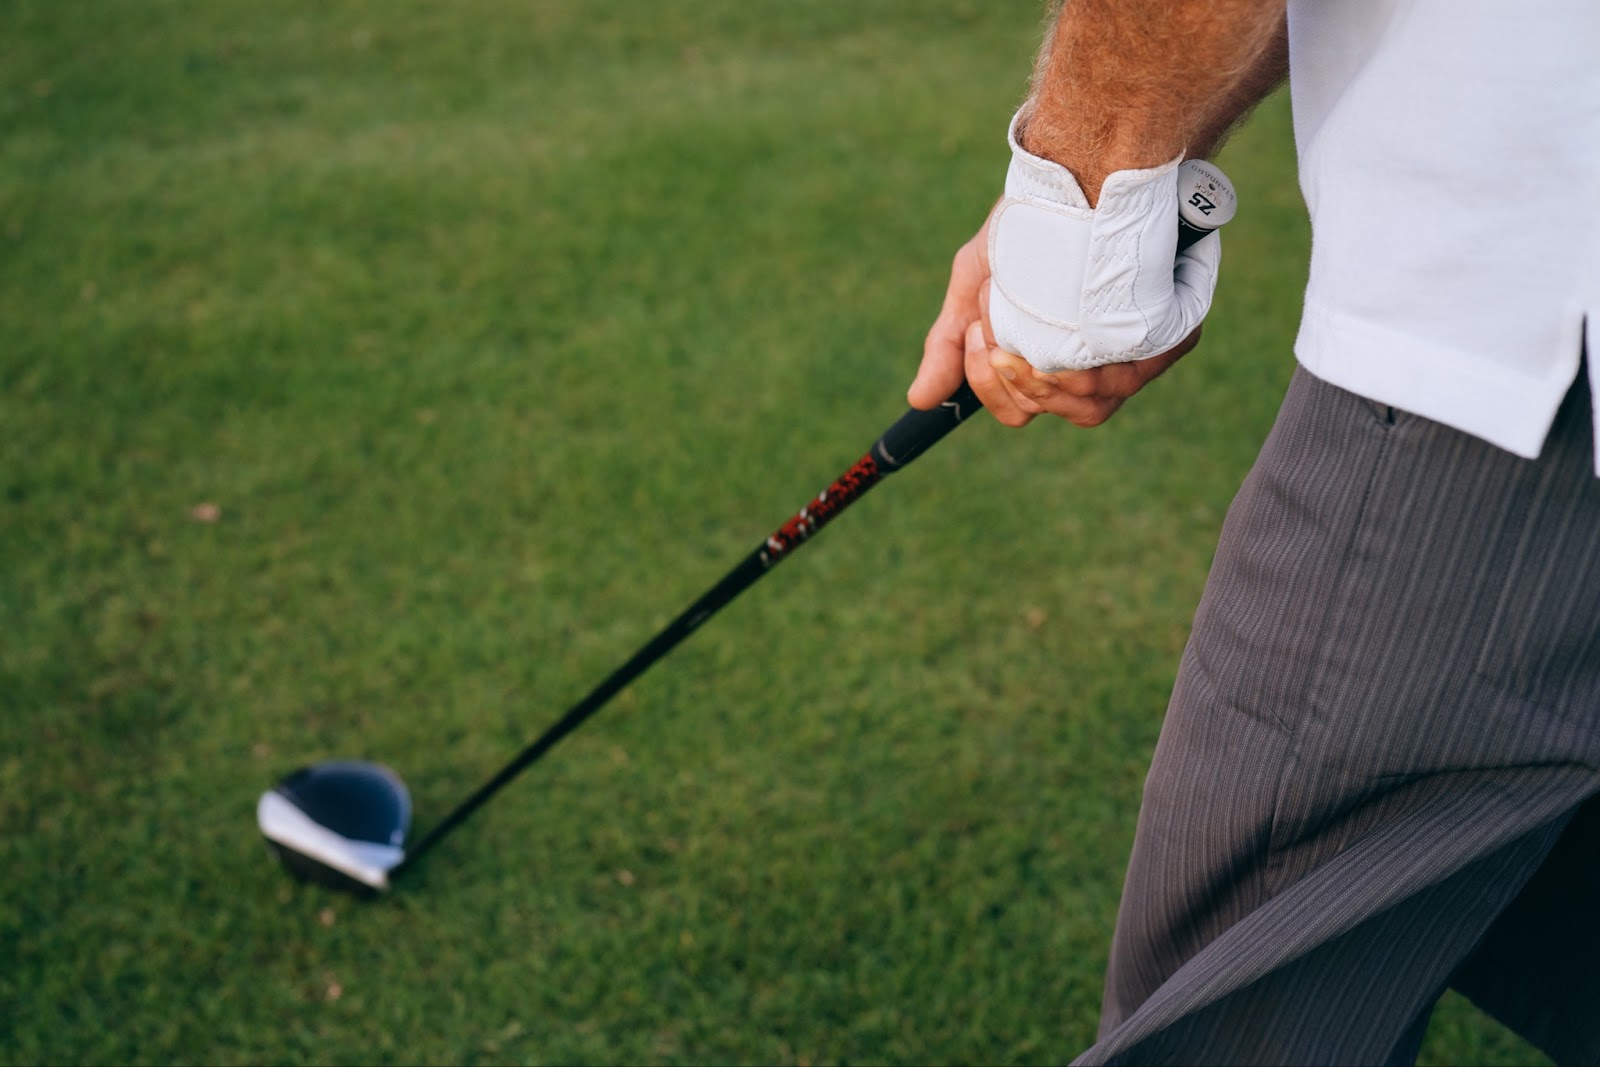 Golf Grip Technique: 5 Tips to Nail Proper Golf Grip and Improve Your Game